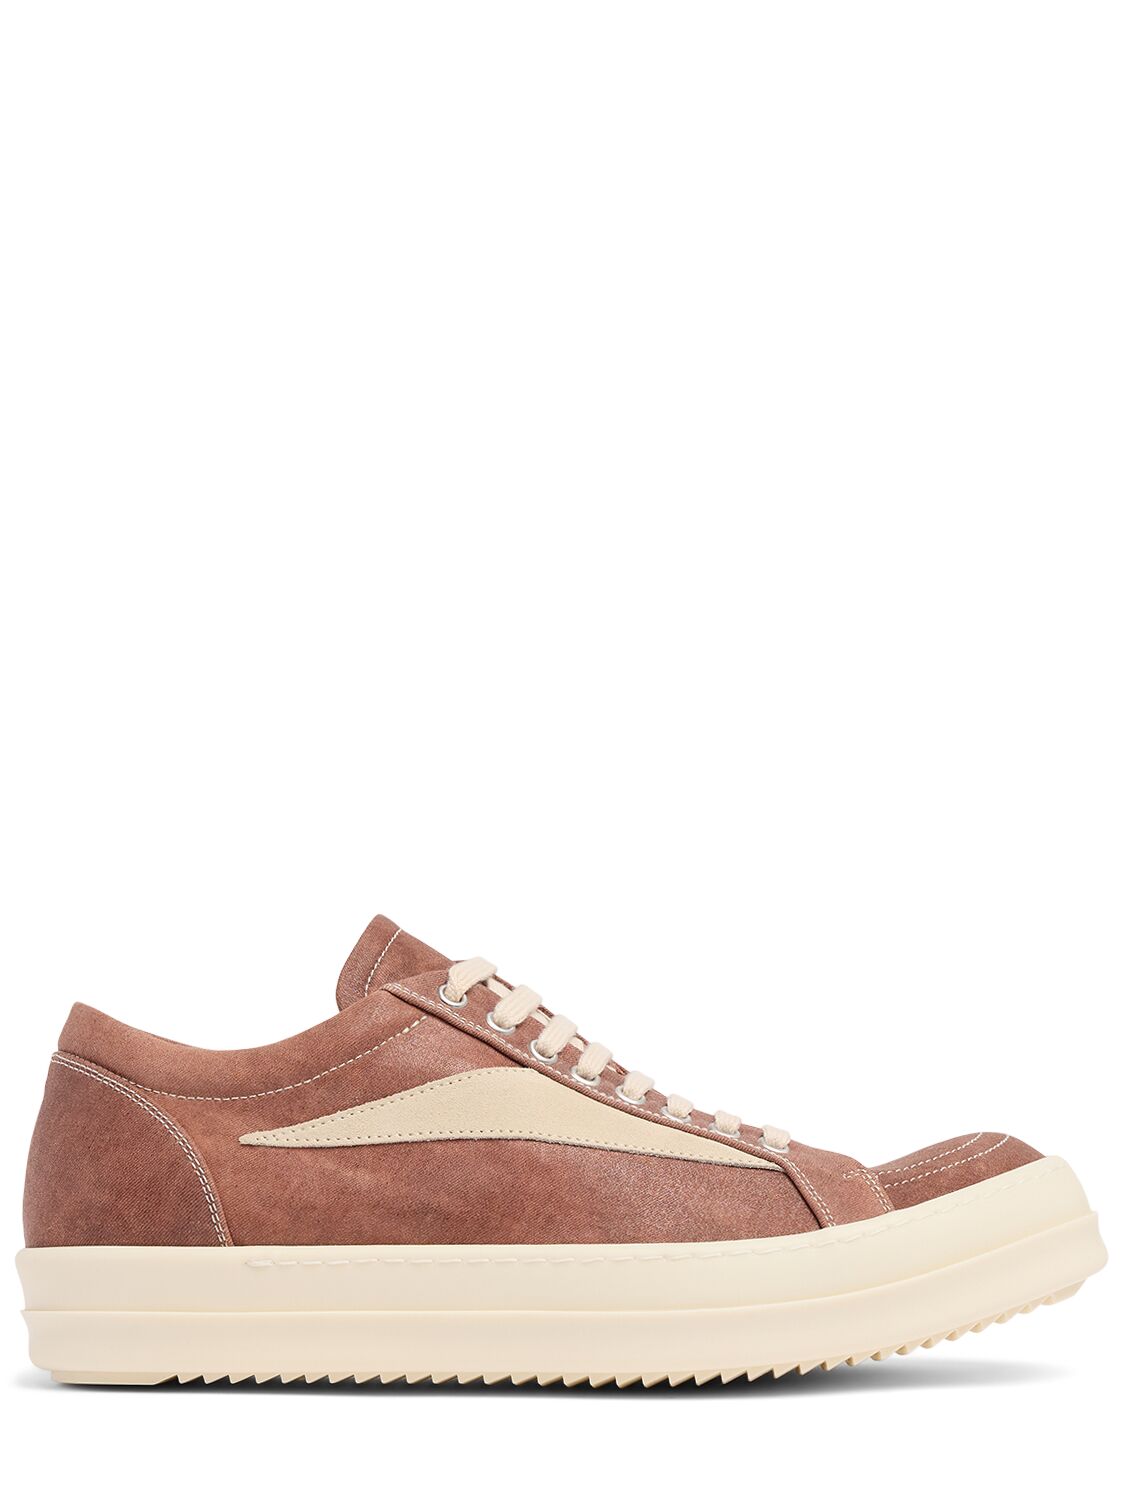 Image of Vintage Canvas Low Top Sneakers